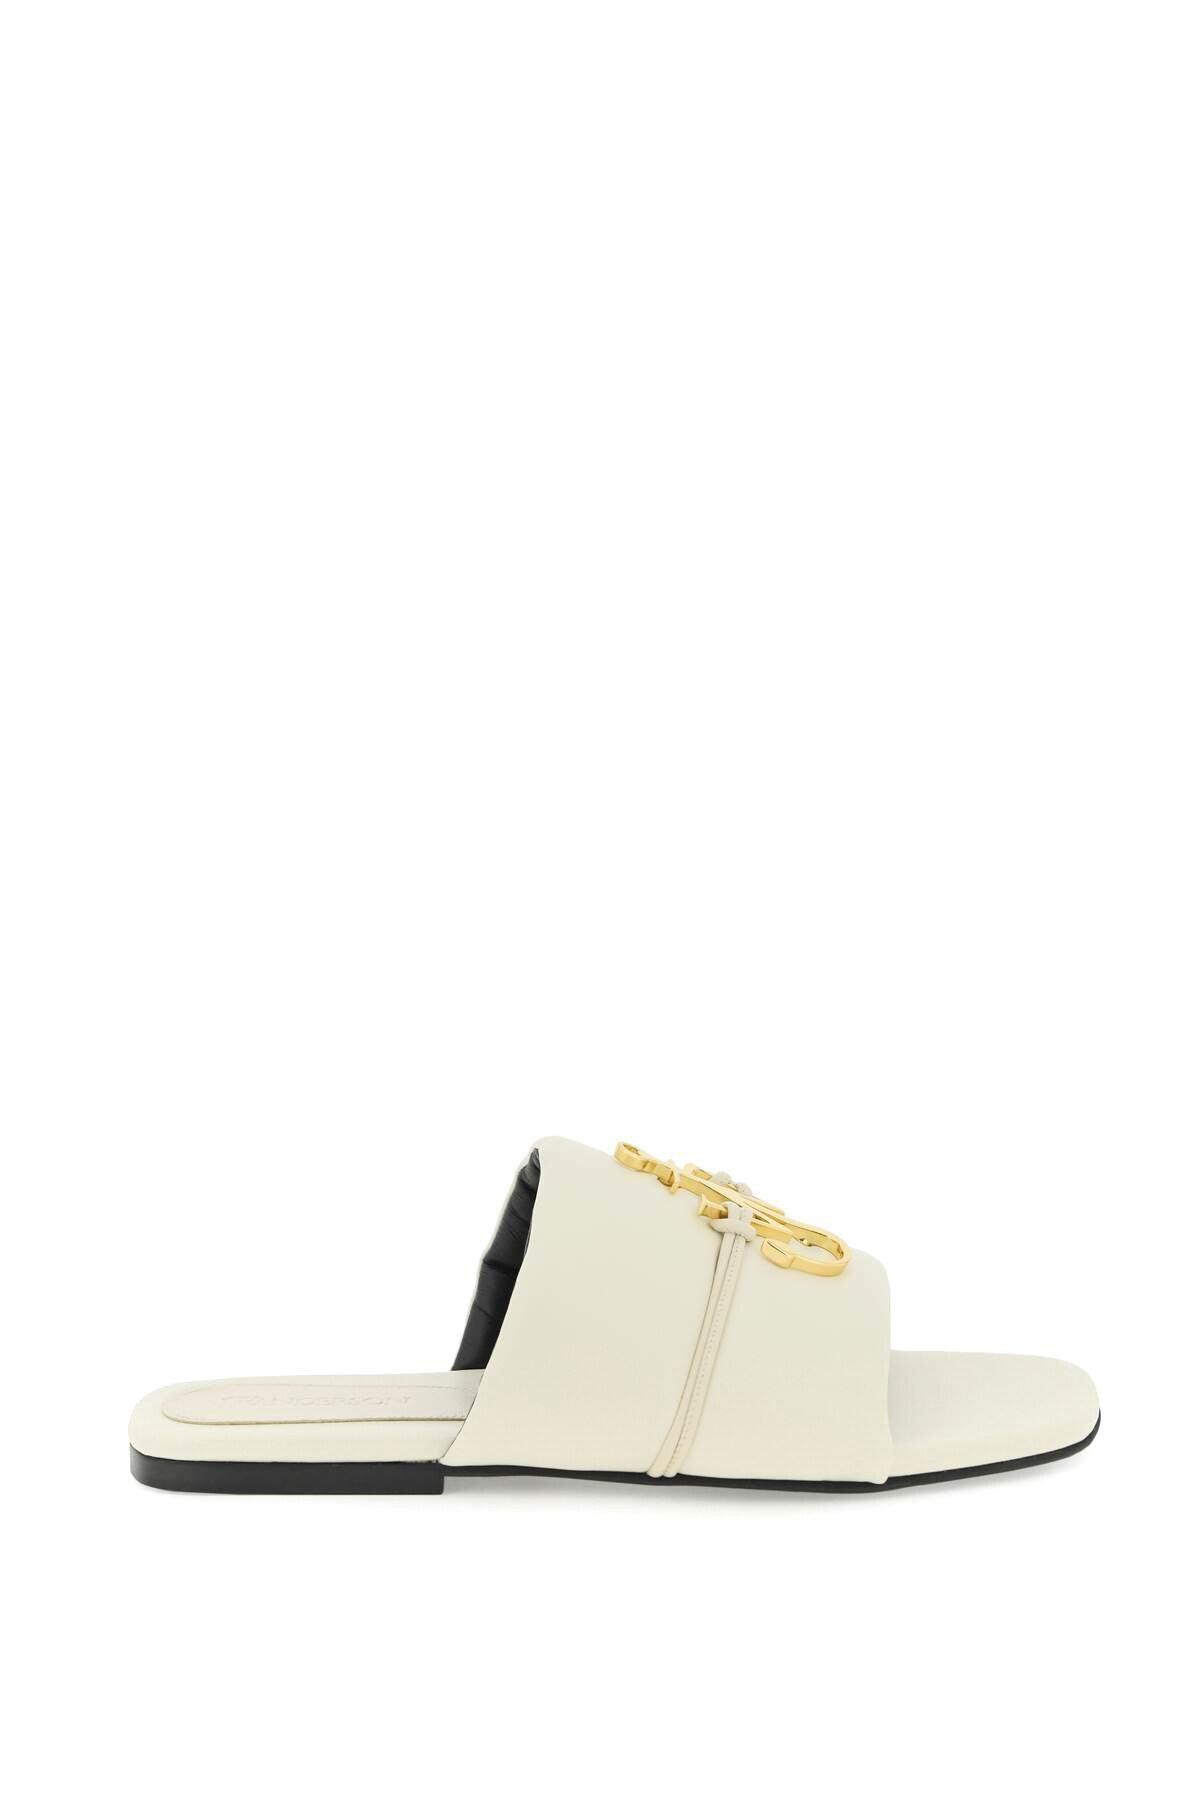 JW Anderson Padded Slides With Anchor Logo in White | Lyst